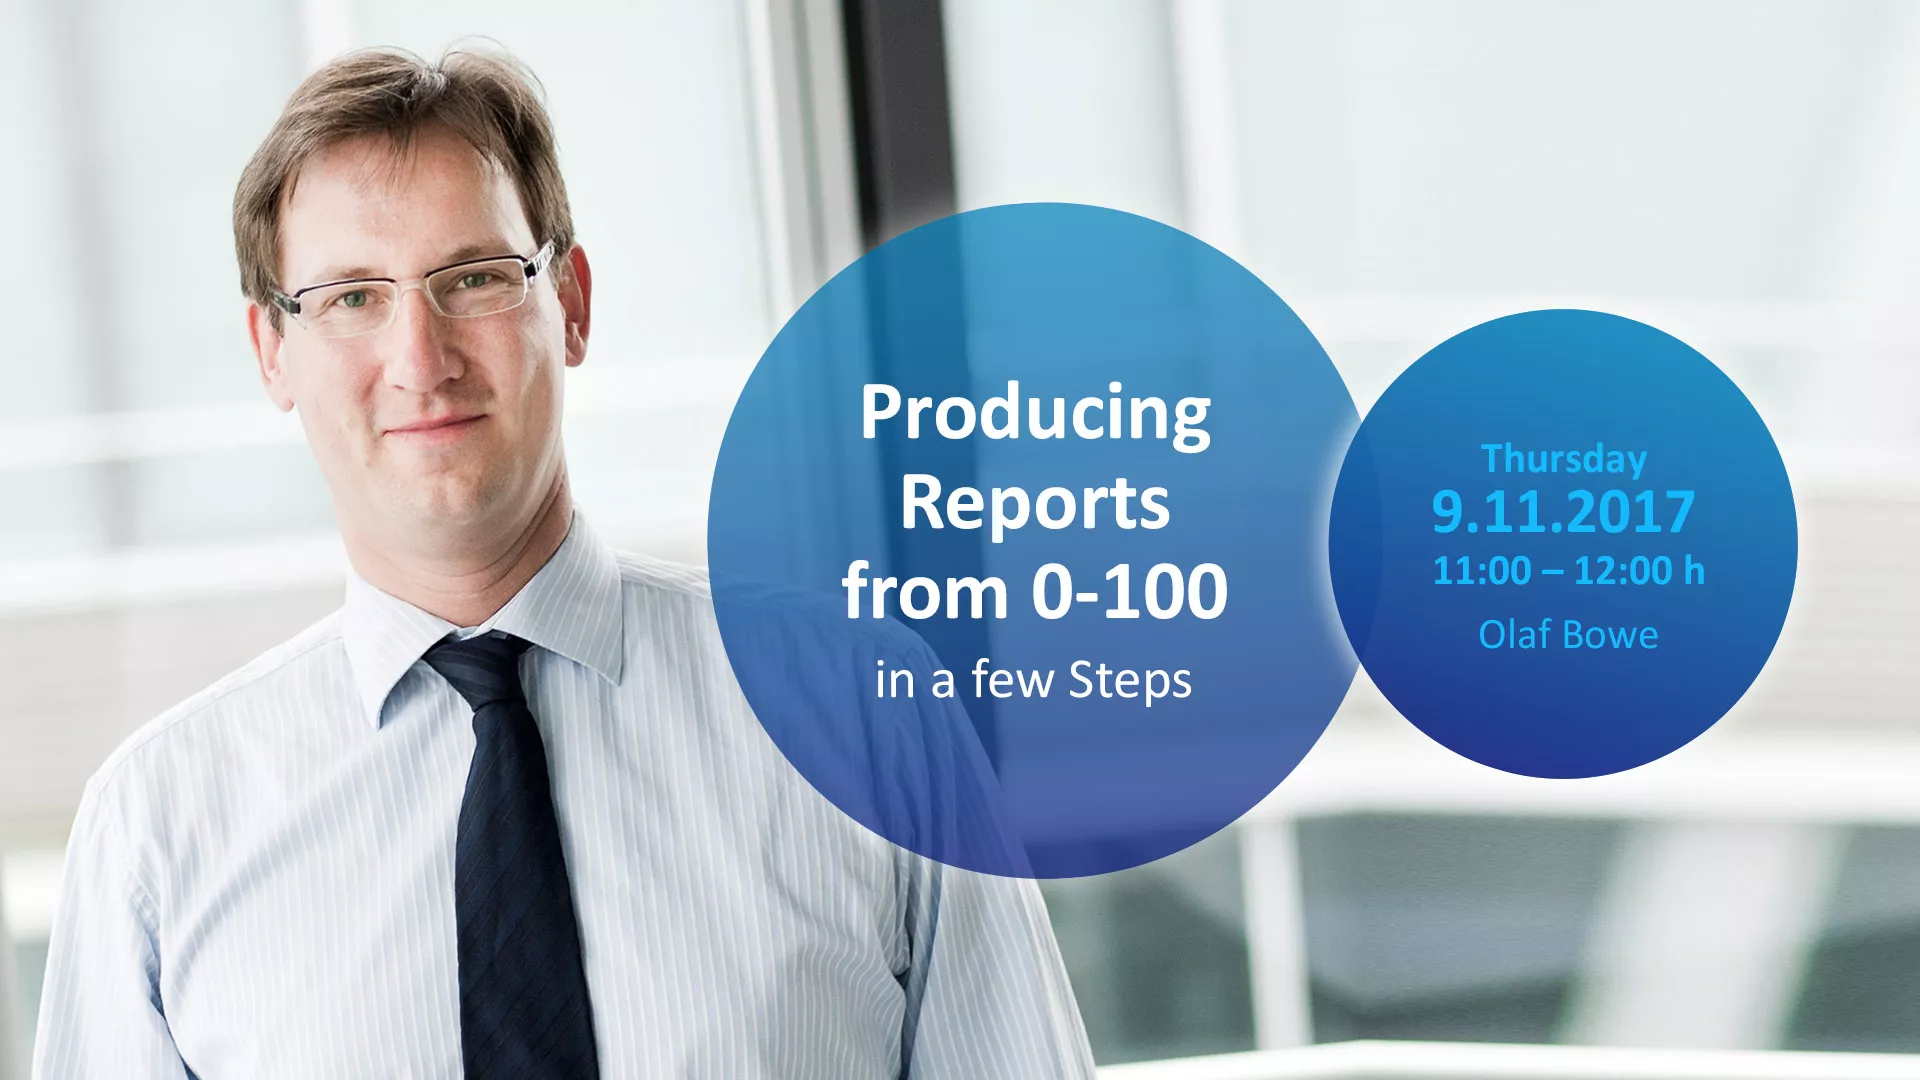 Webinar Producing Reports from 0-100